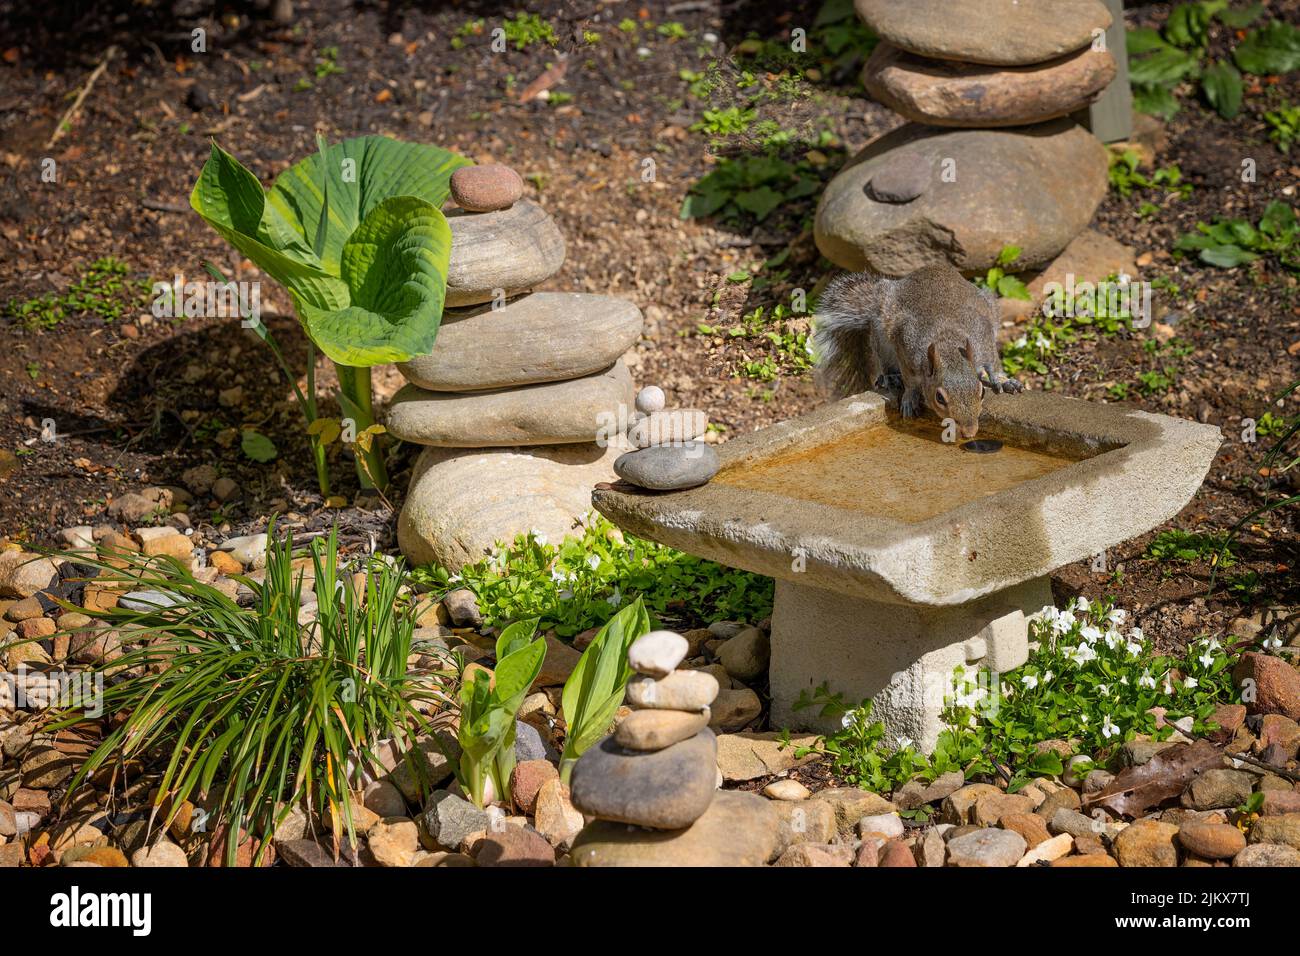 A gray squirrel quenches his thirst from a small birdbath in a garden. Stock Photo